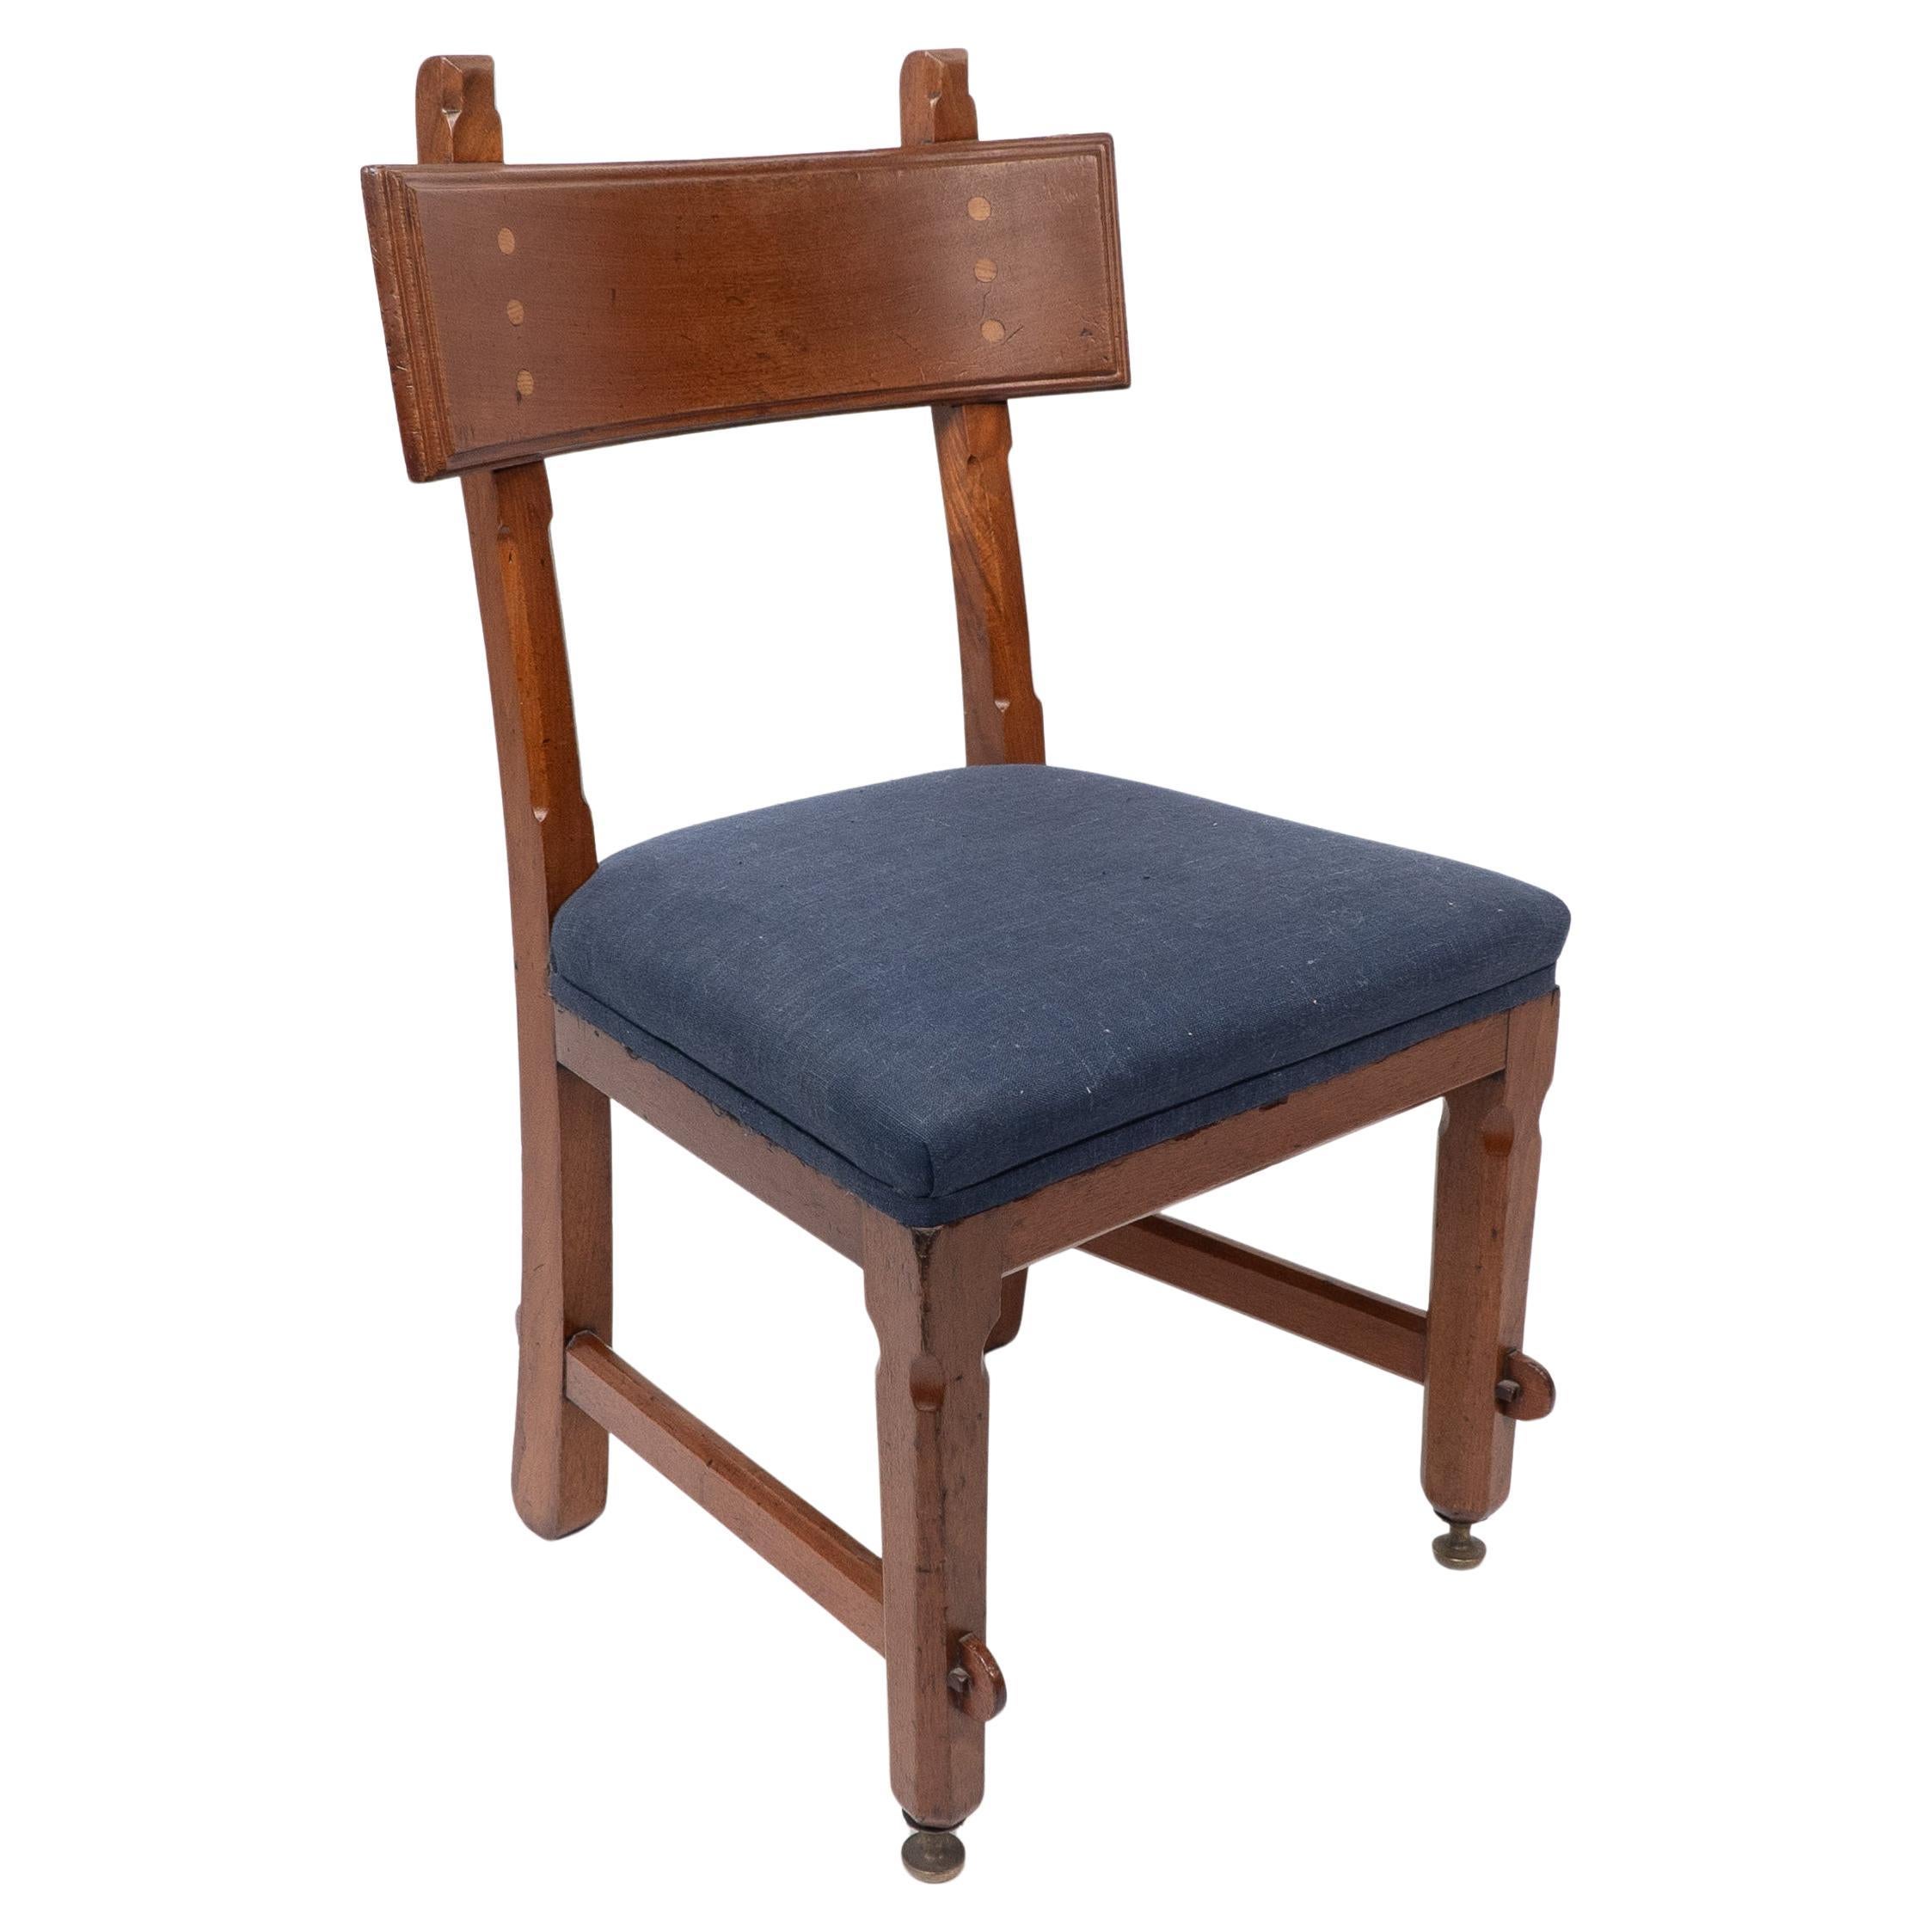 E W Pugin. A walnut side chair with curvaceous back rest with oak pegs